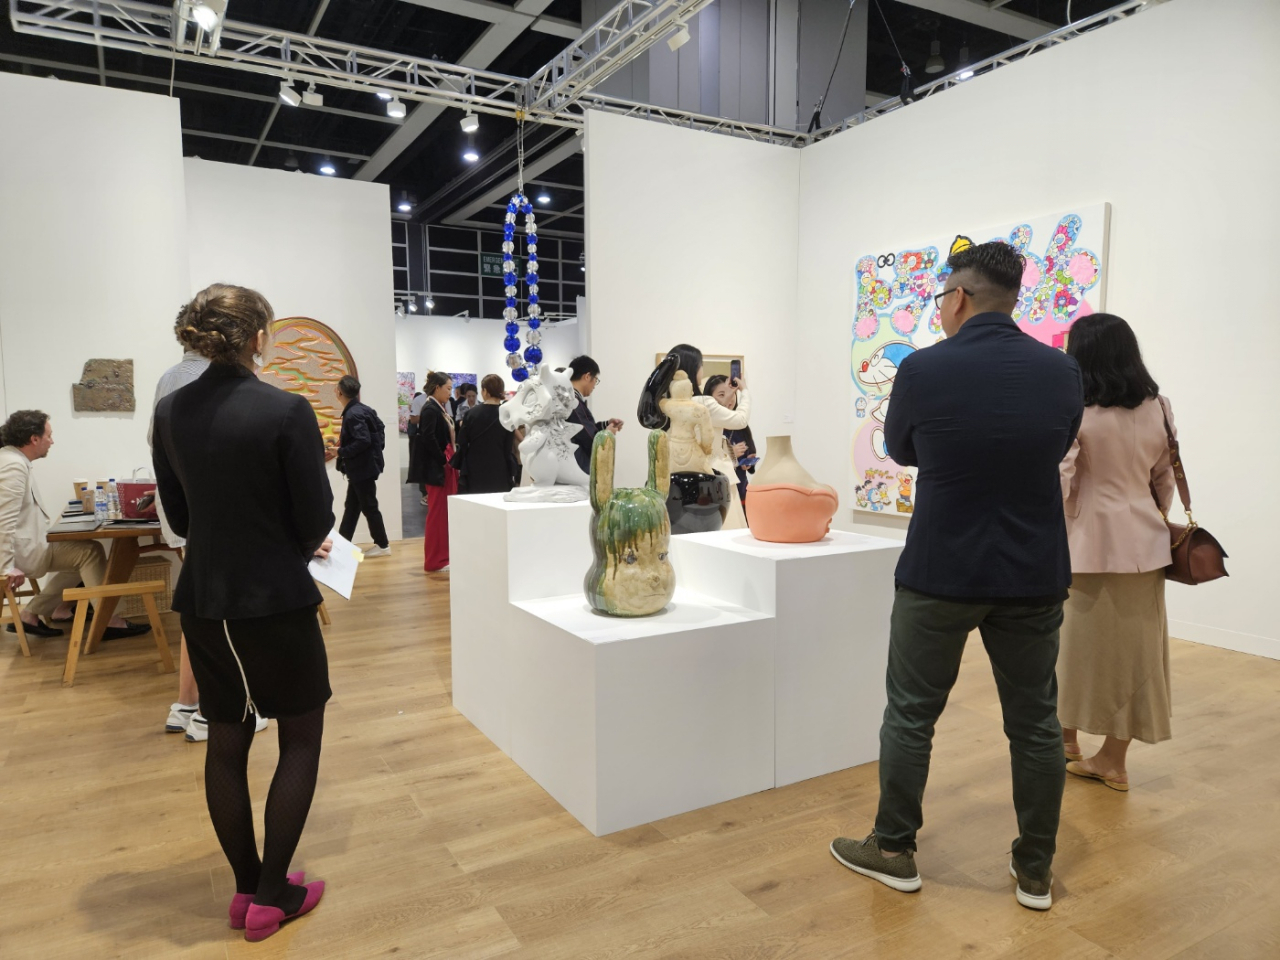 Fairgoers look around the Perrotin booth on March 21 at Art Basel Hong Kong, at the Hong Kong Convention and Exhibition Centre. (Park Yuna/The Korea Herald)